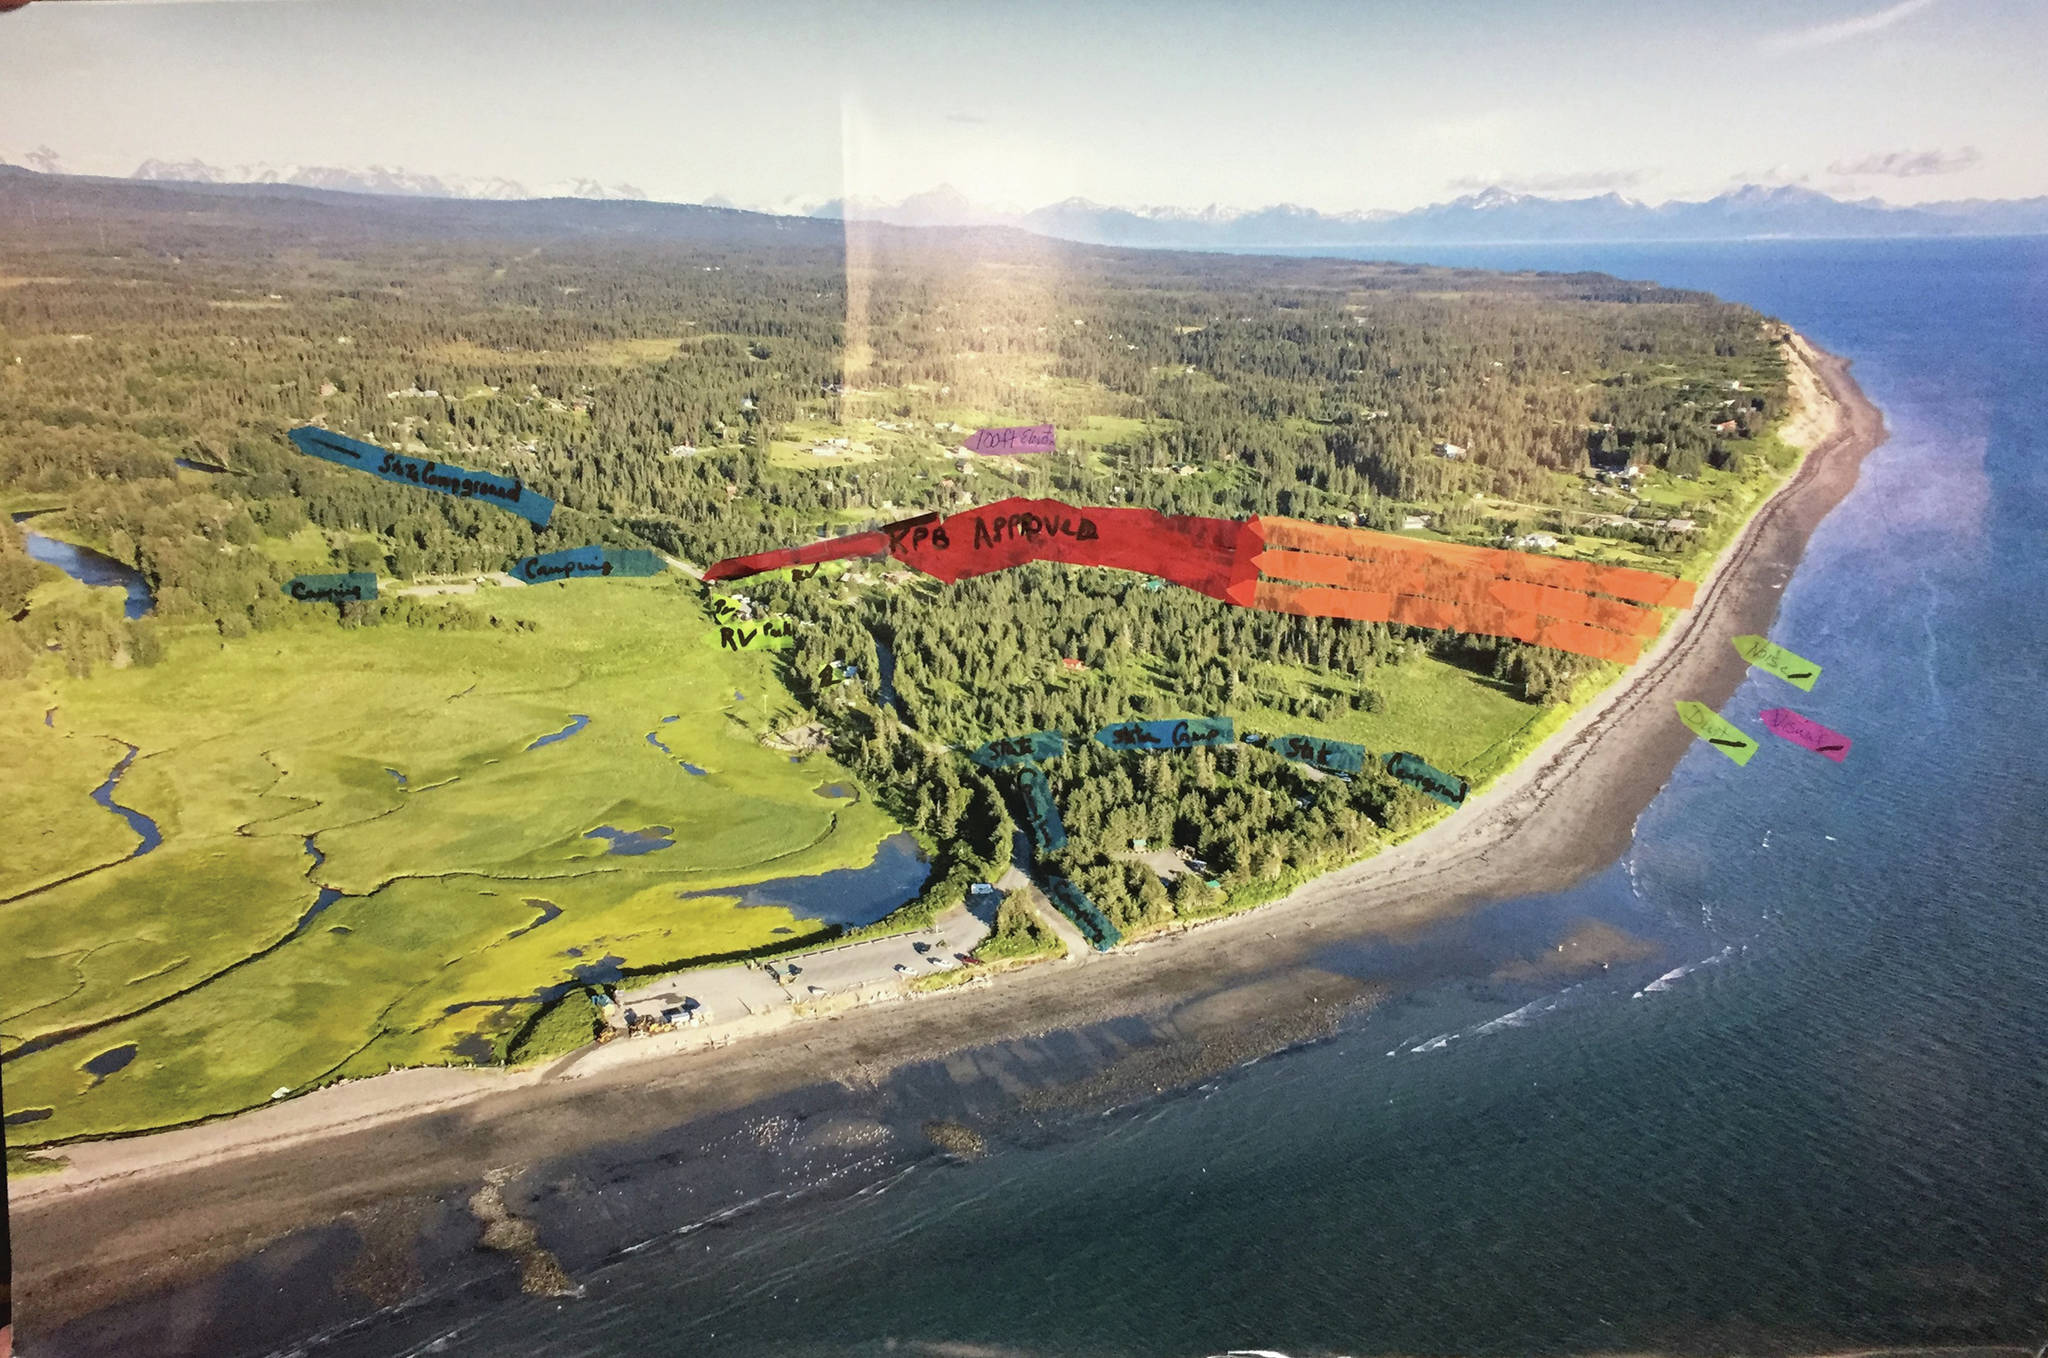 A diagram presented by Teresa Jacobson Gregory illustrates the proposed extension of the Trimbles’ gravel pit and the impact it may have on the surrounding state recreation area. The red markers indicate the current gravel mining area, and the orange represents the area the extension may allow for mining if approved. (Image courtesy Teresa Jacobson Gregory)